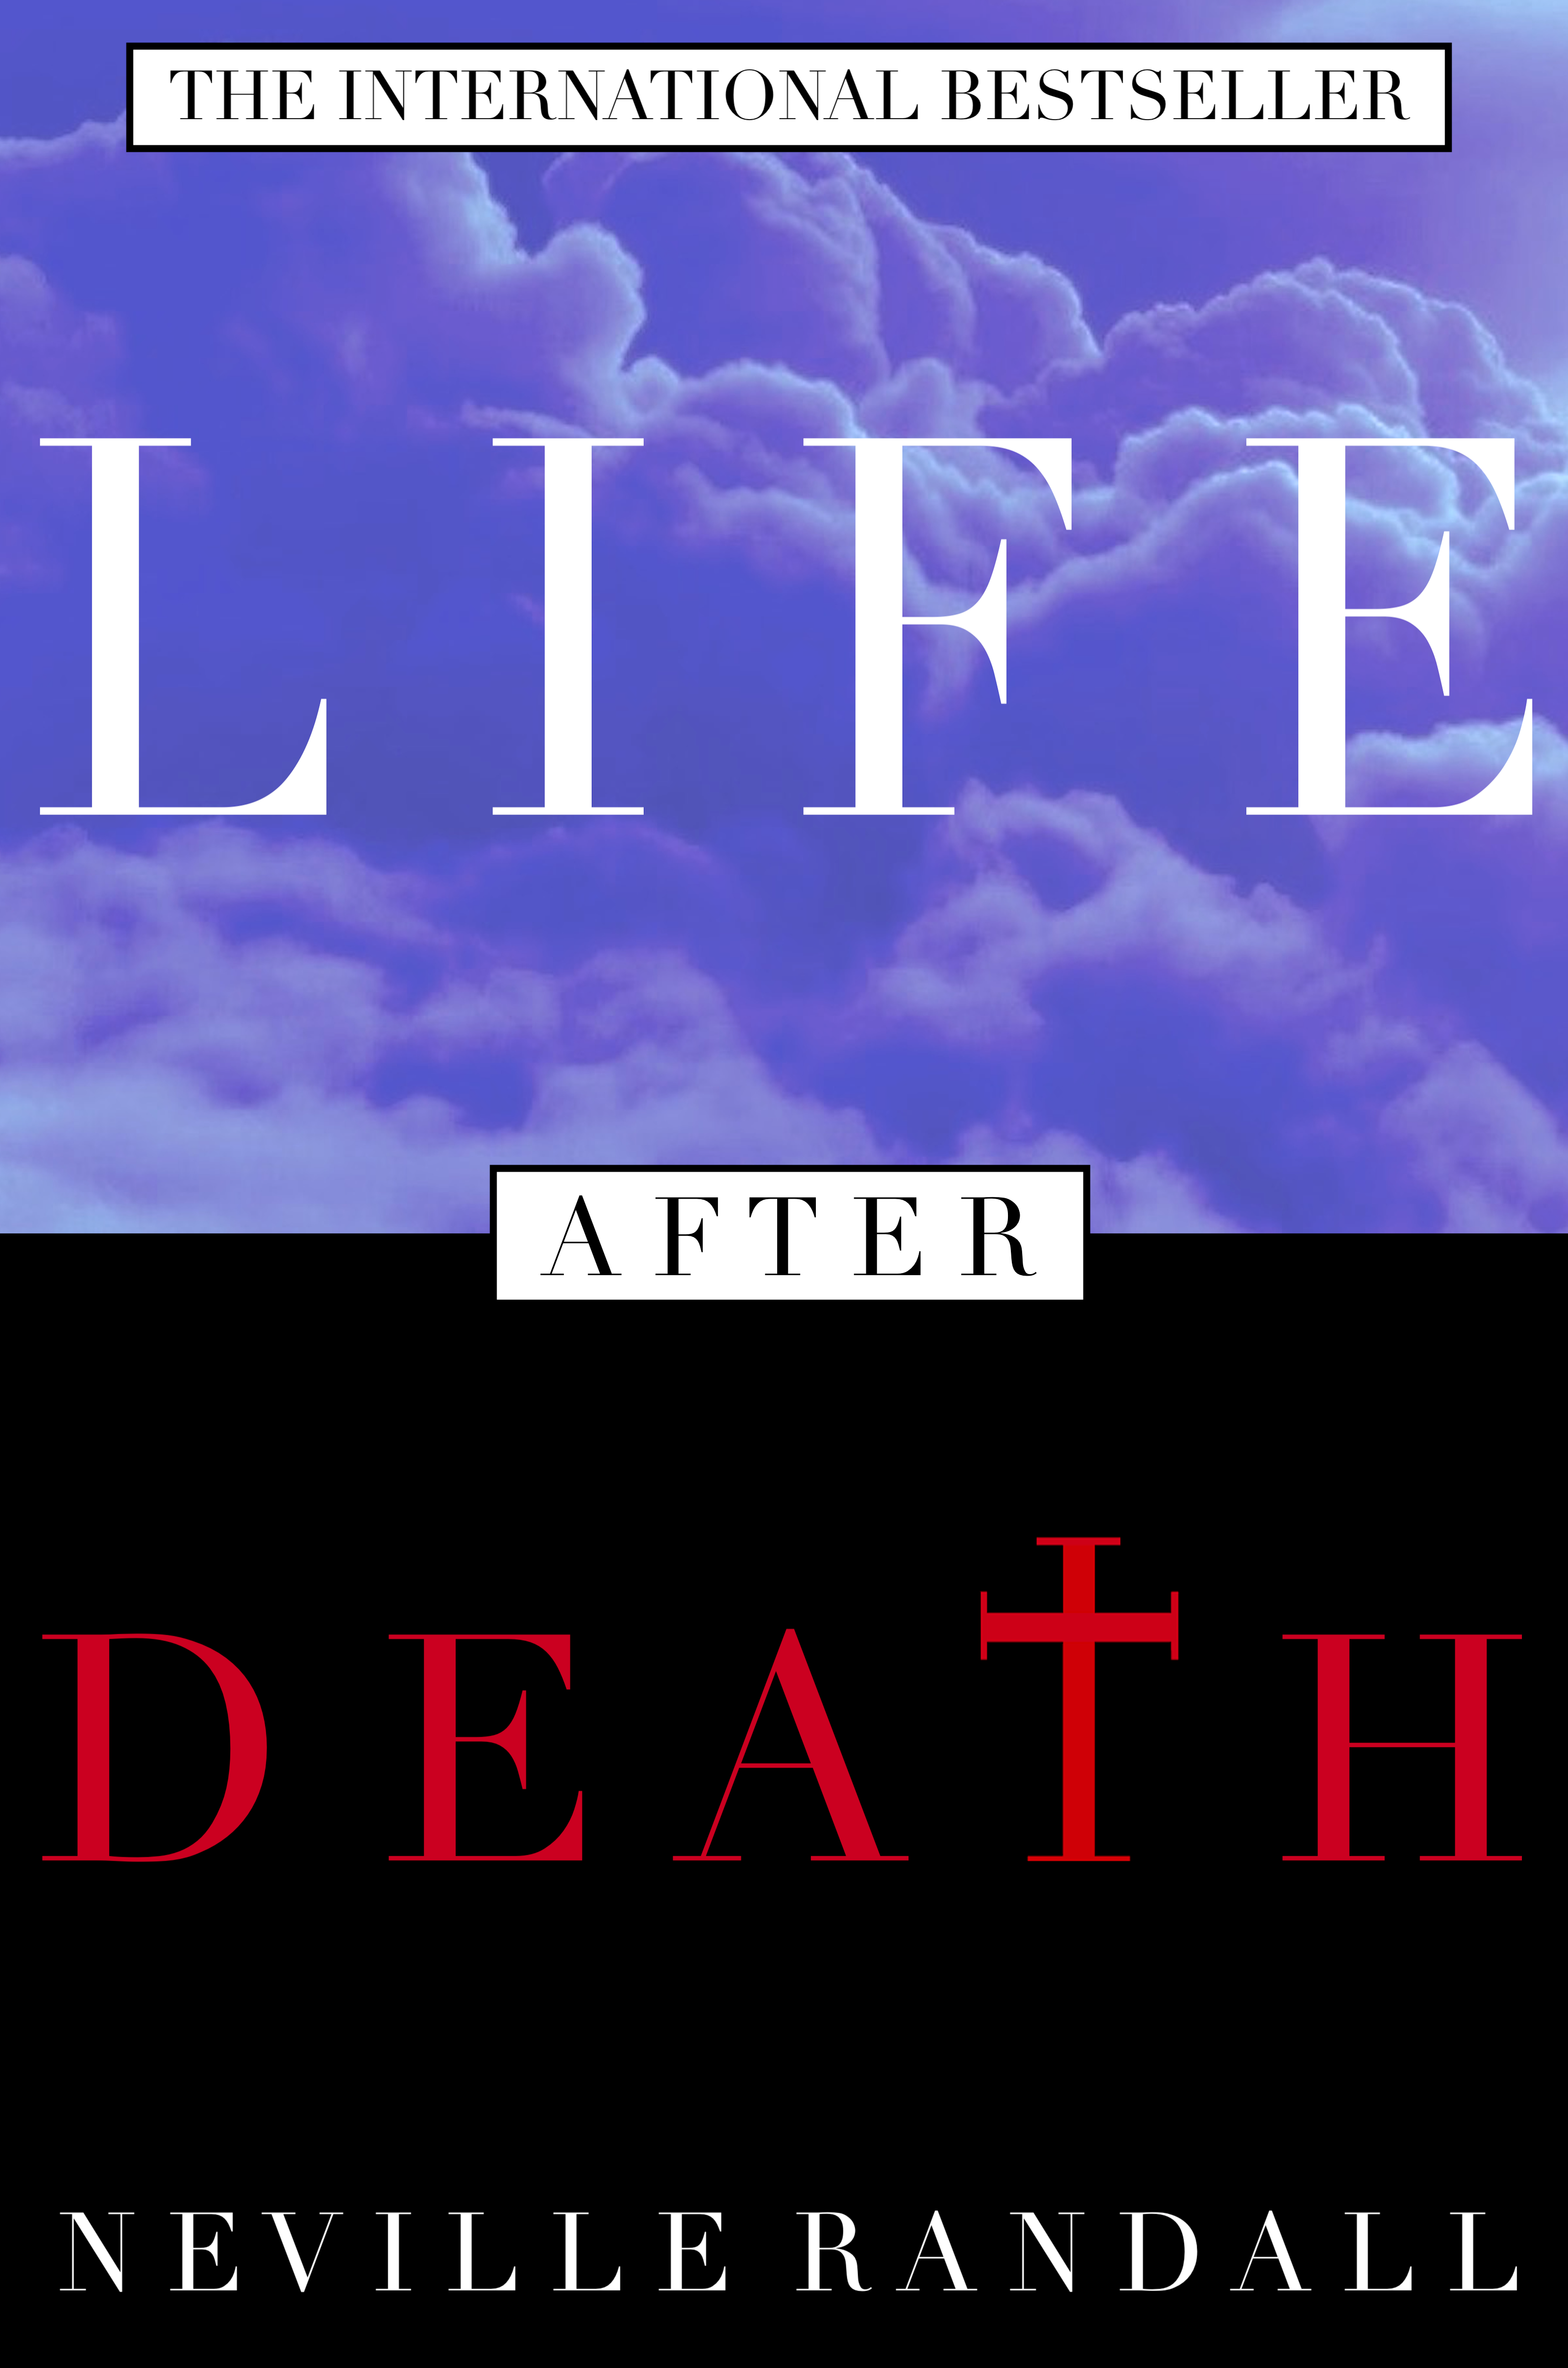 100-life-after-death-cover-copy.png